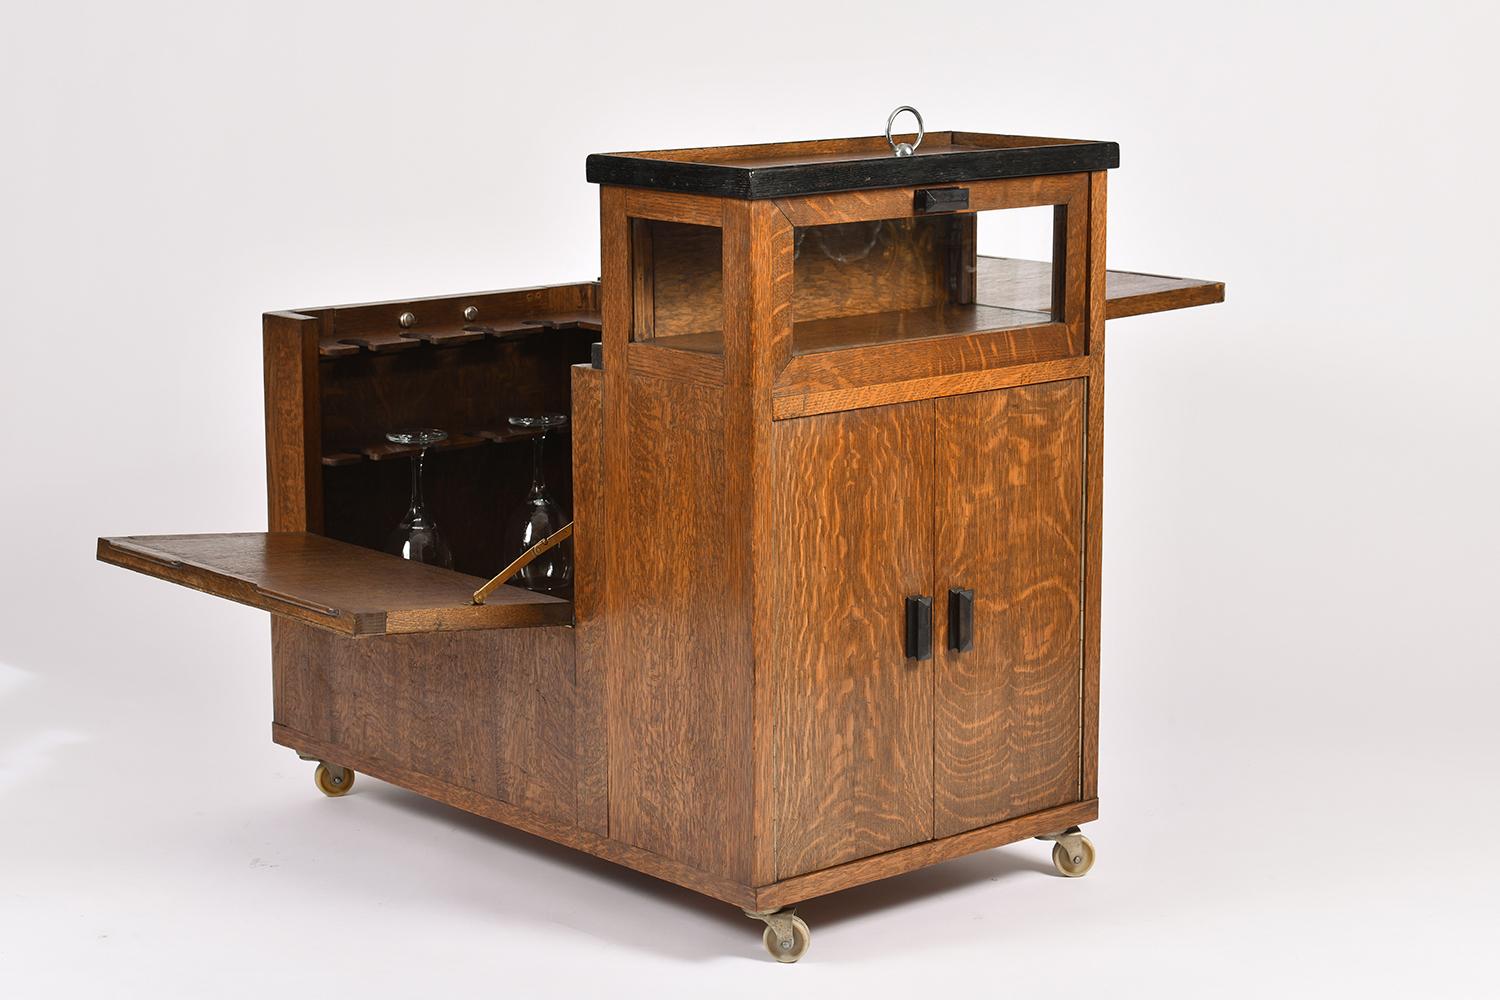 An Art Deco oak drinks trolley, the main compartment opening up to reveal 24 glasses holders and a removable ice cubes bucket, the other side with a glazed compartment above a two-door bottles.
France, circa 1930.